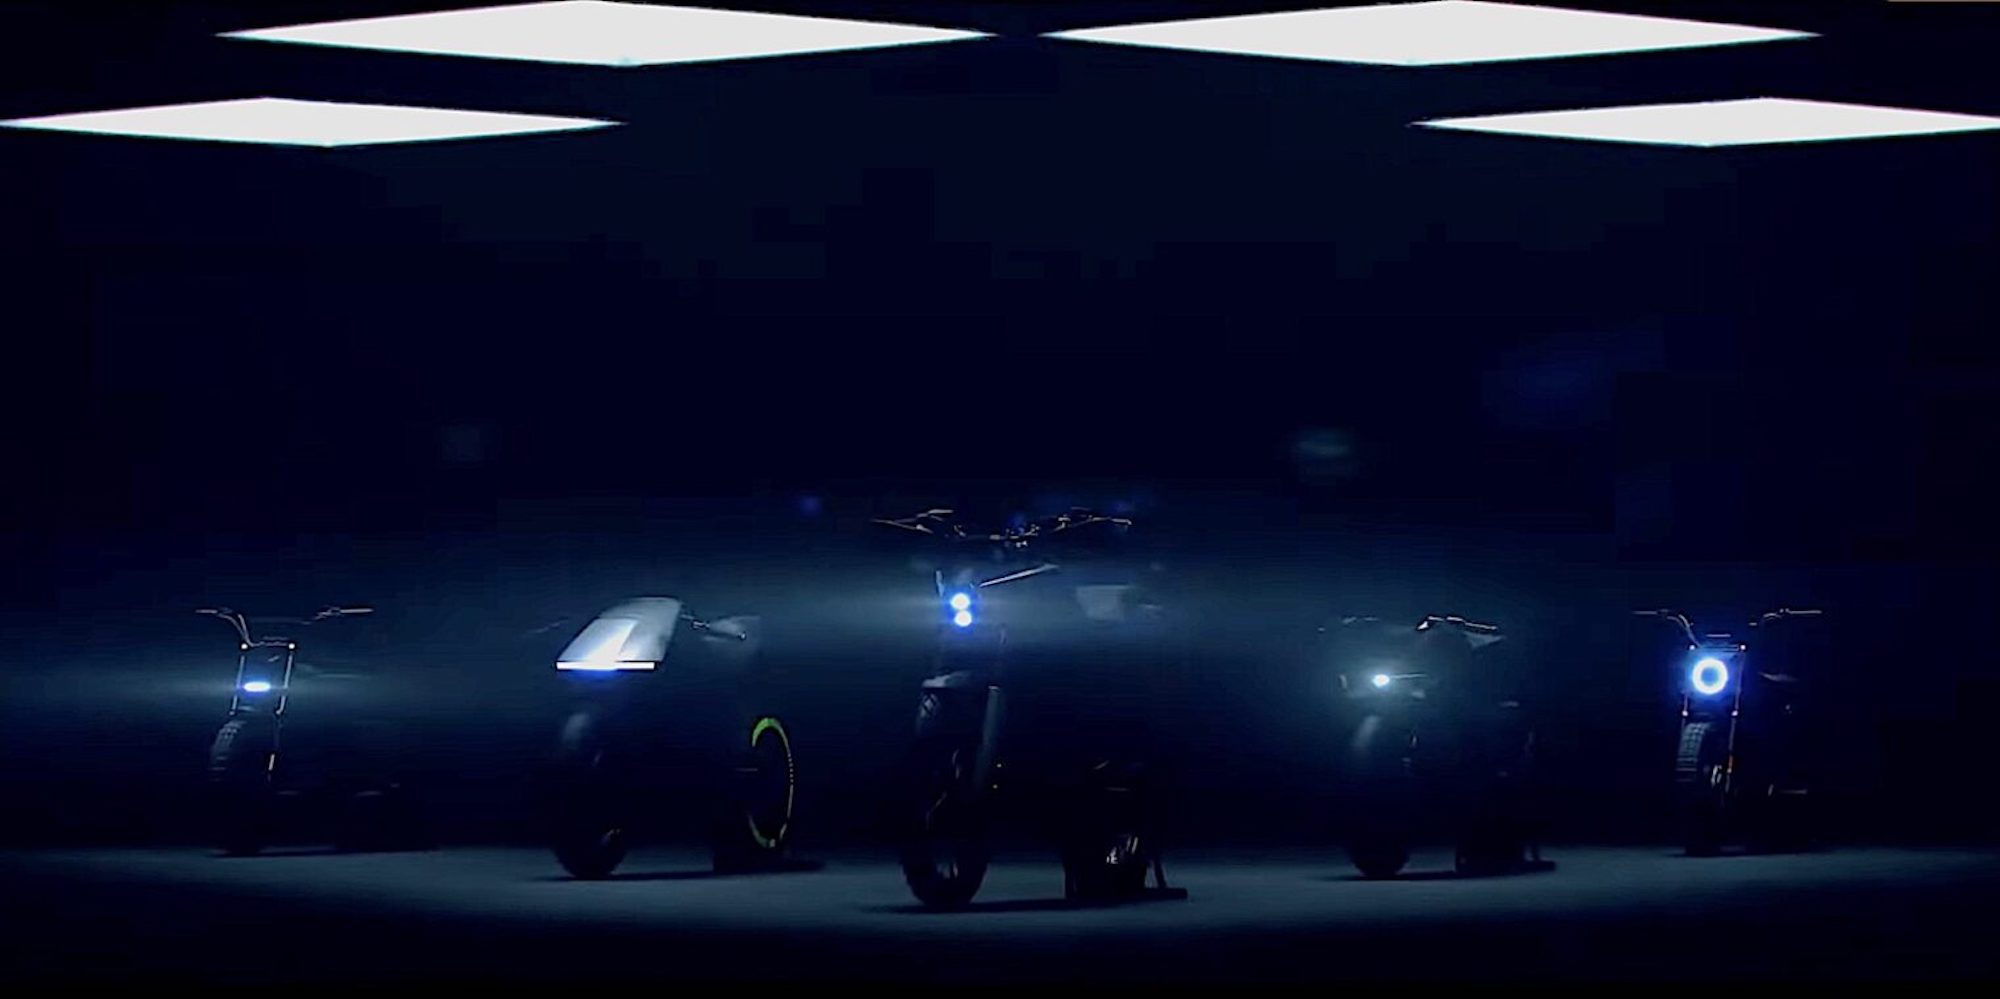 A view of Ola's teaser trailer showing a series of bikes waiting for their debut. Media sourced from Youtube.